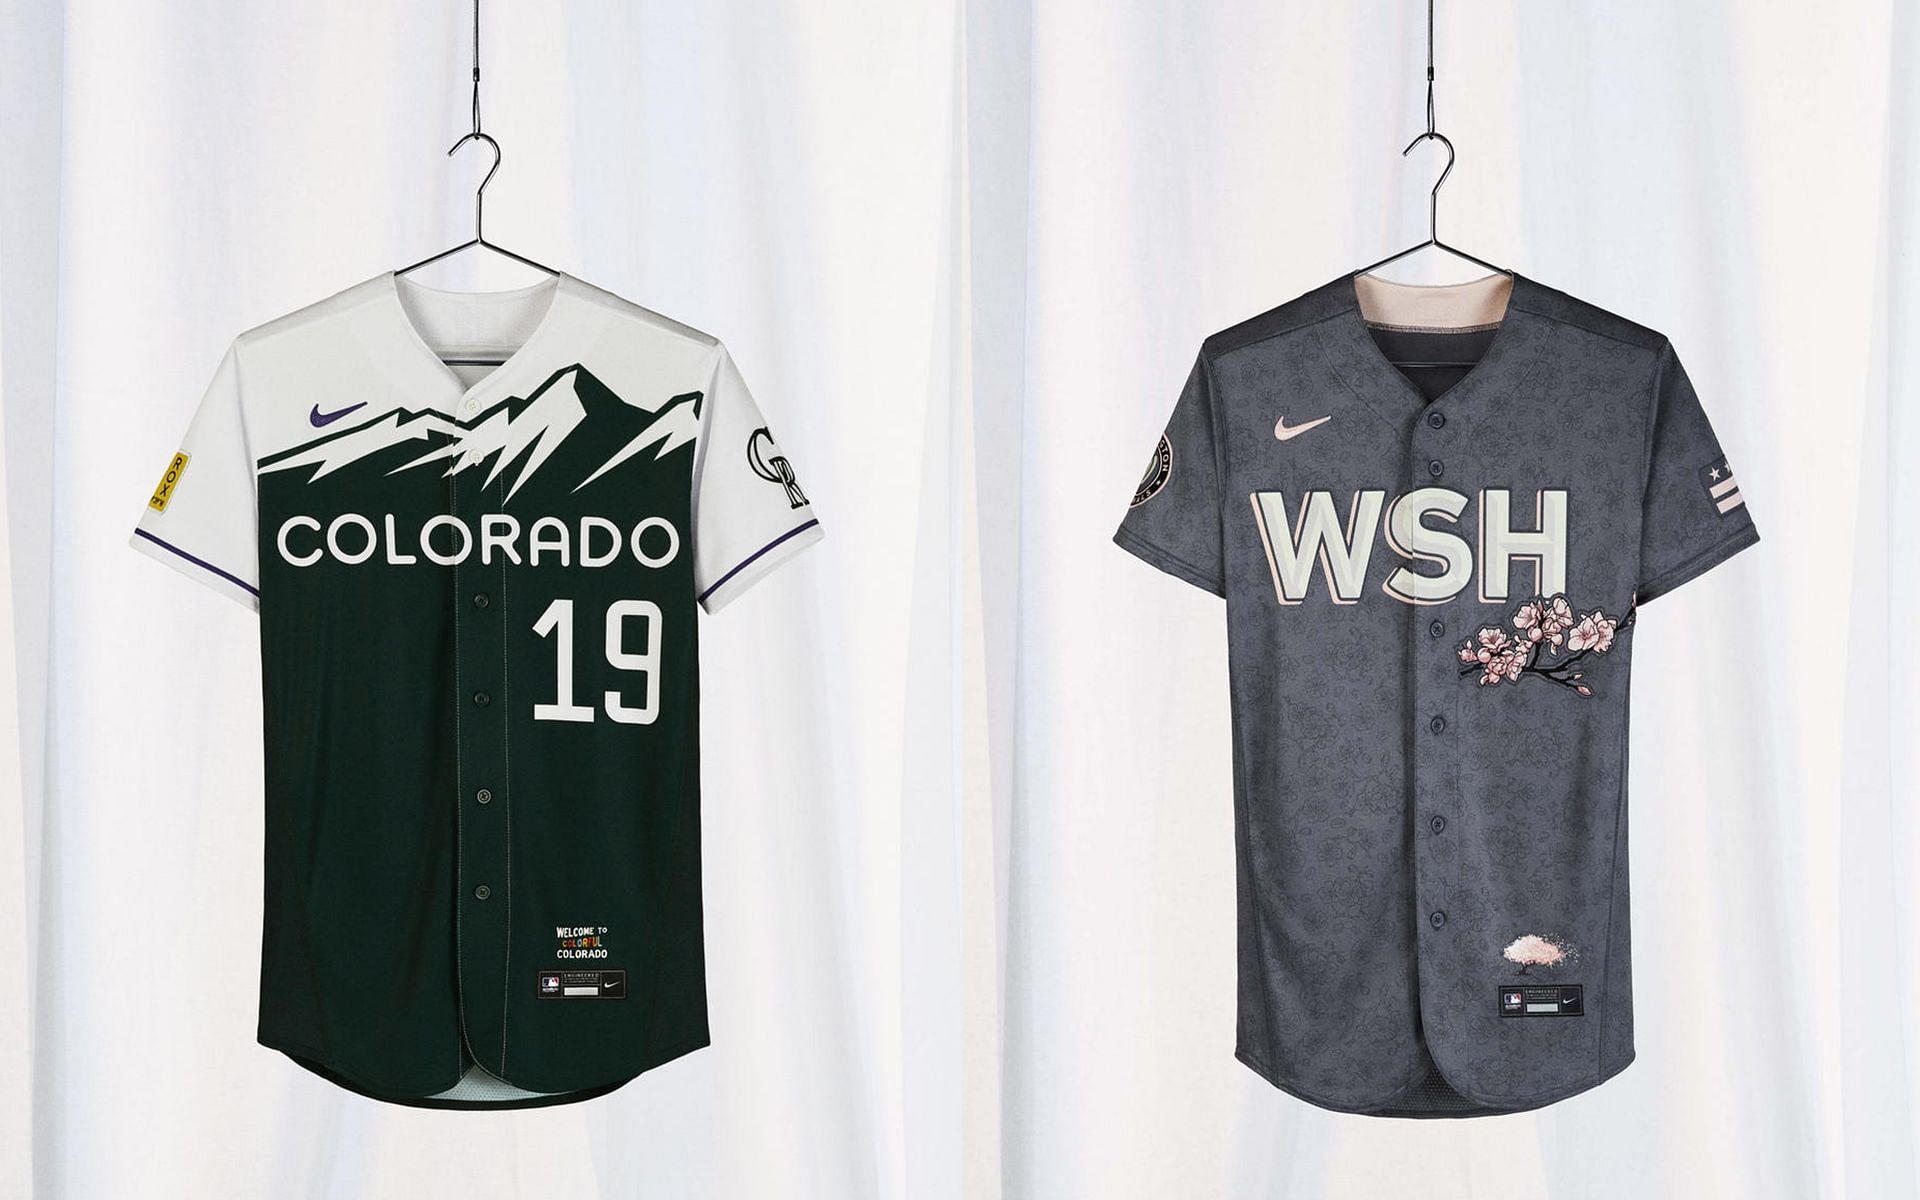 All-Star Game MLB Jerseys for sale